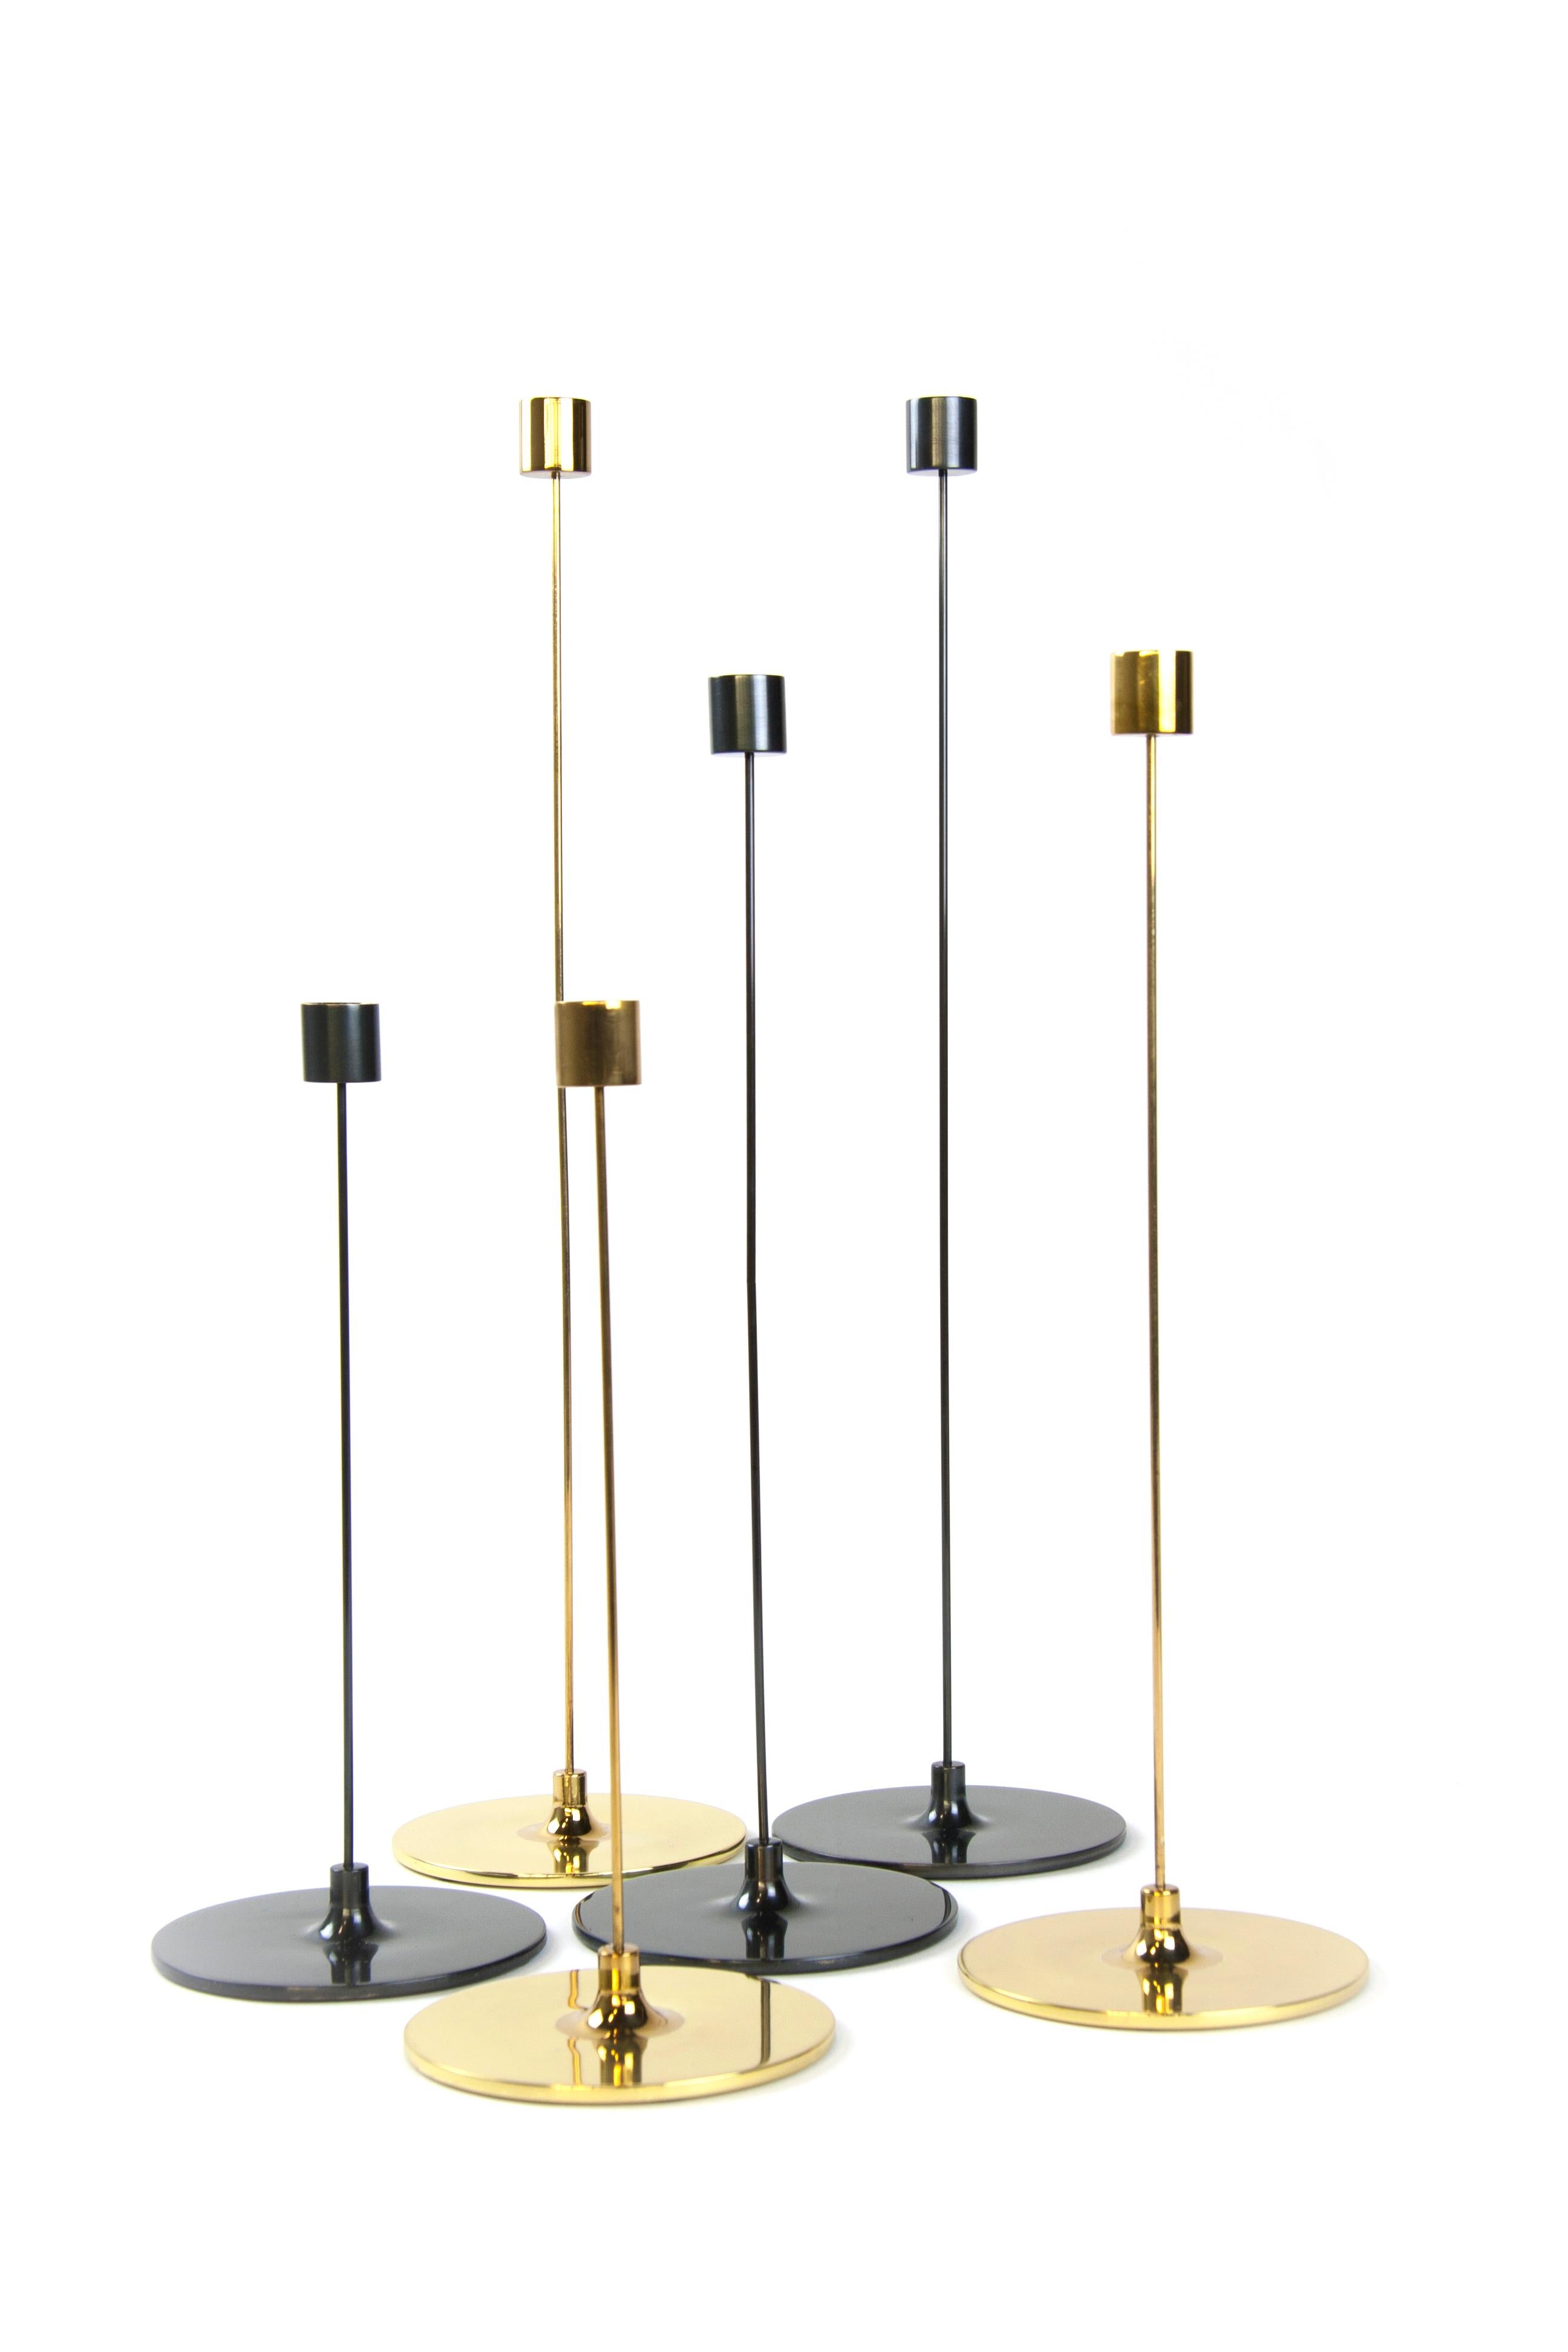 Medium pin brass candlestick by Gentner Design
Dimensions: D 12.7 x H 40.6 cm
Materials: polished tarnished brass
Available in polished tarnished brass and darkened brass.
Available in small, medium and large.

With an 12”, 16”, or 20” height,